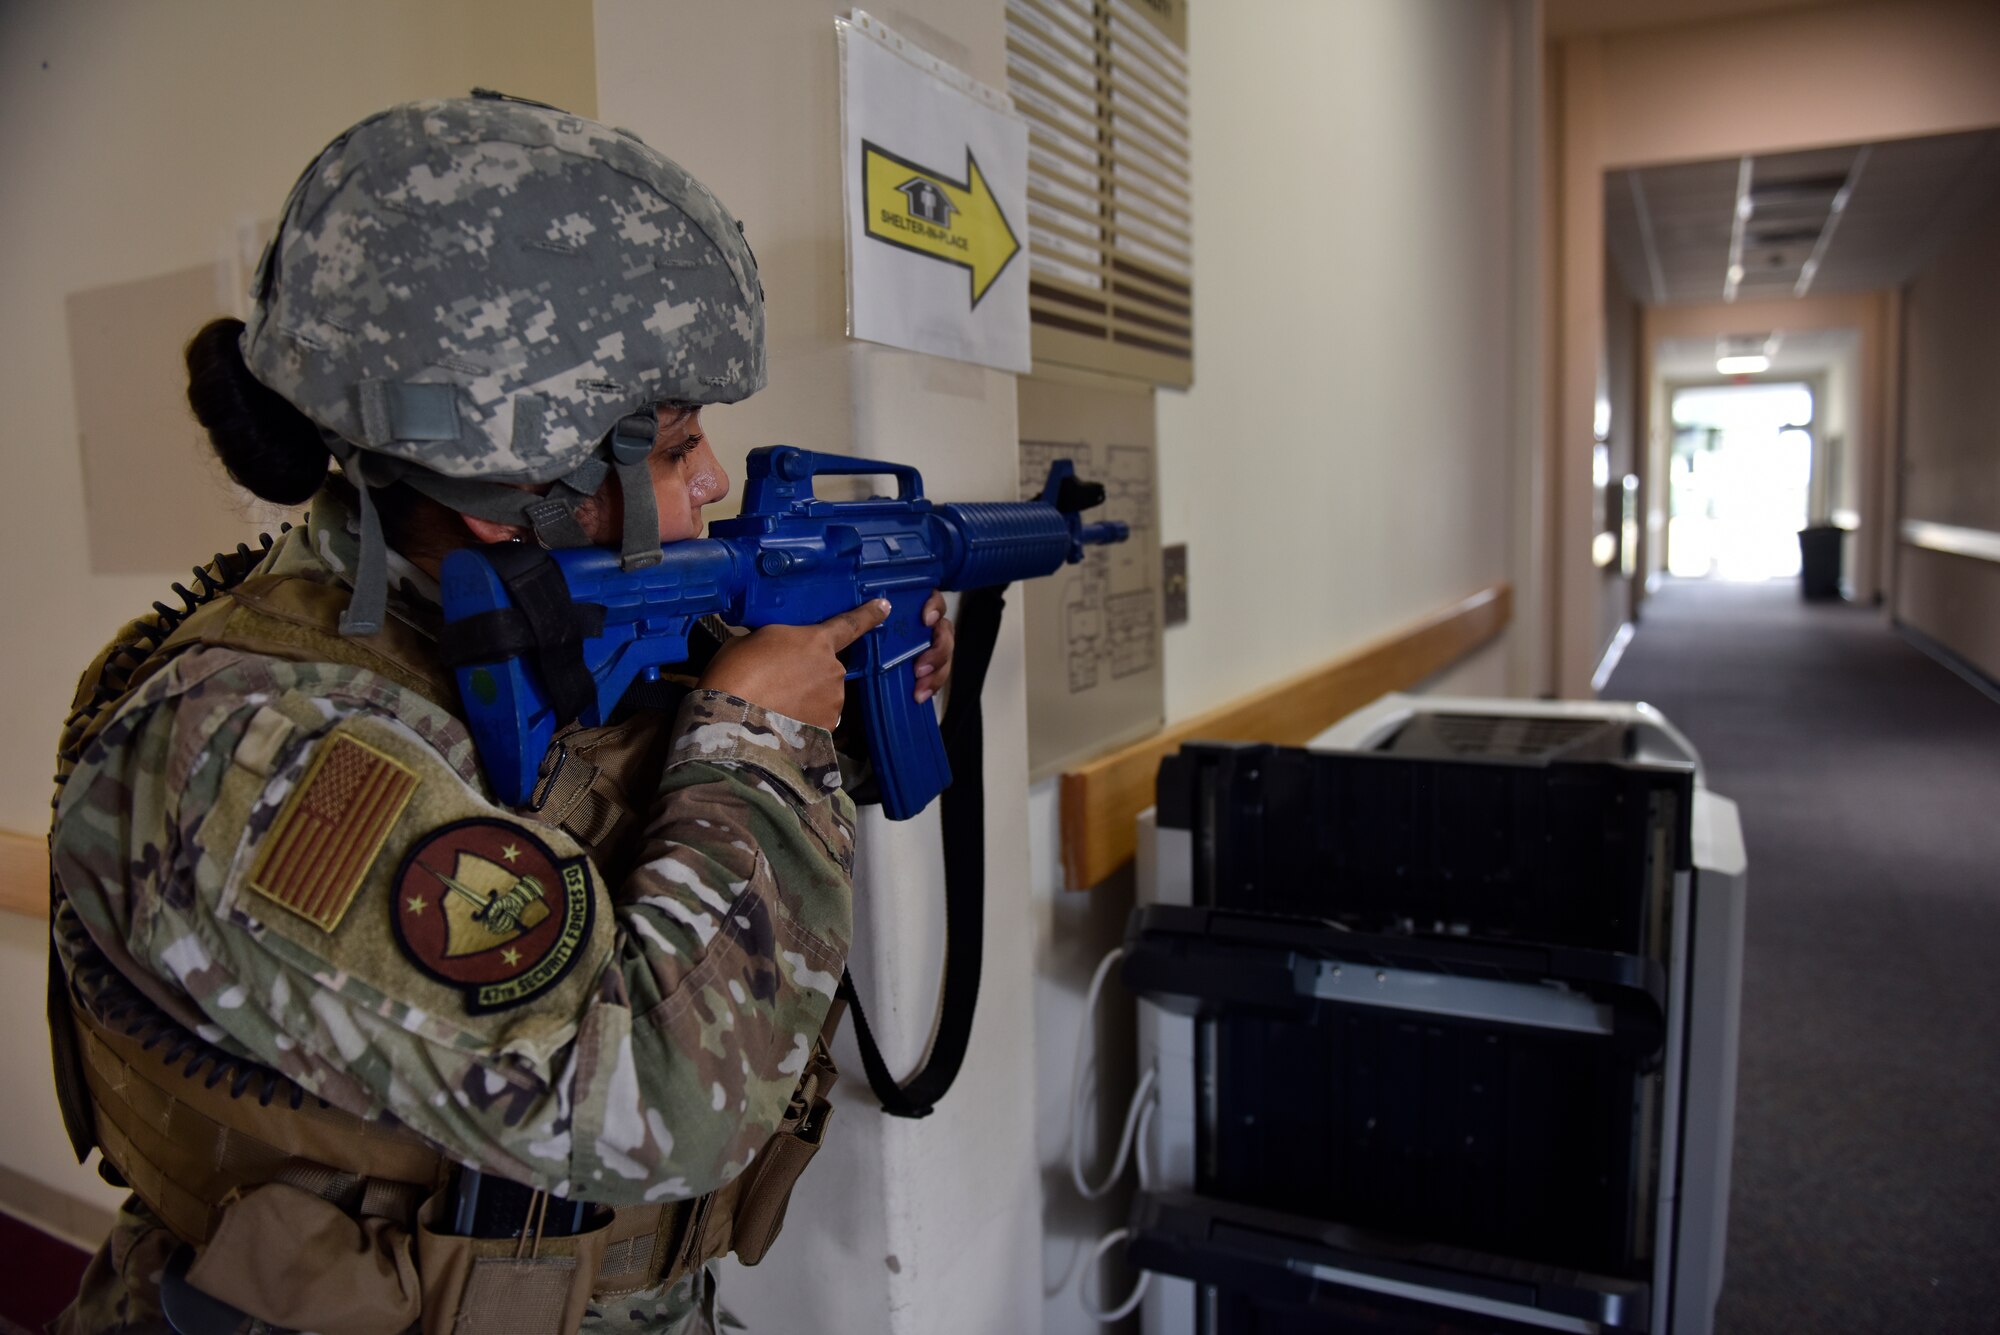 Staff Sgt. Desiree Gonzalez, 47th Security Forces Squadron police services NCO in charge, locks down an entry control point during a training exercise at Laughlin Air Force Base, Texas, July 22, 2019. The exercise, aimed at bolstering crisis readiness and response capabilities, simulated a hostage situation that lasted for nearly two hours. (U.S. Air Force photo by Staff Sgt. Benjamin N. Valmoja)